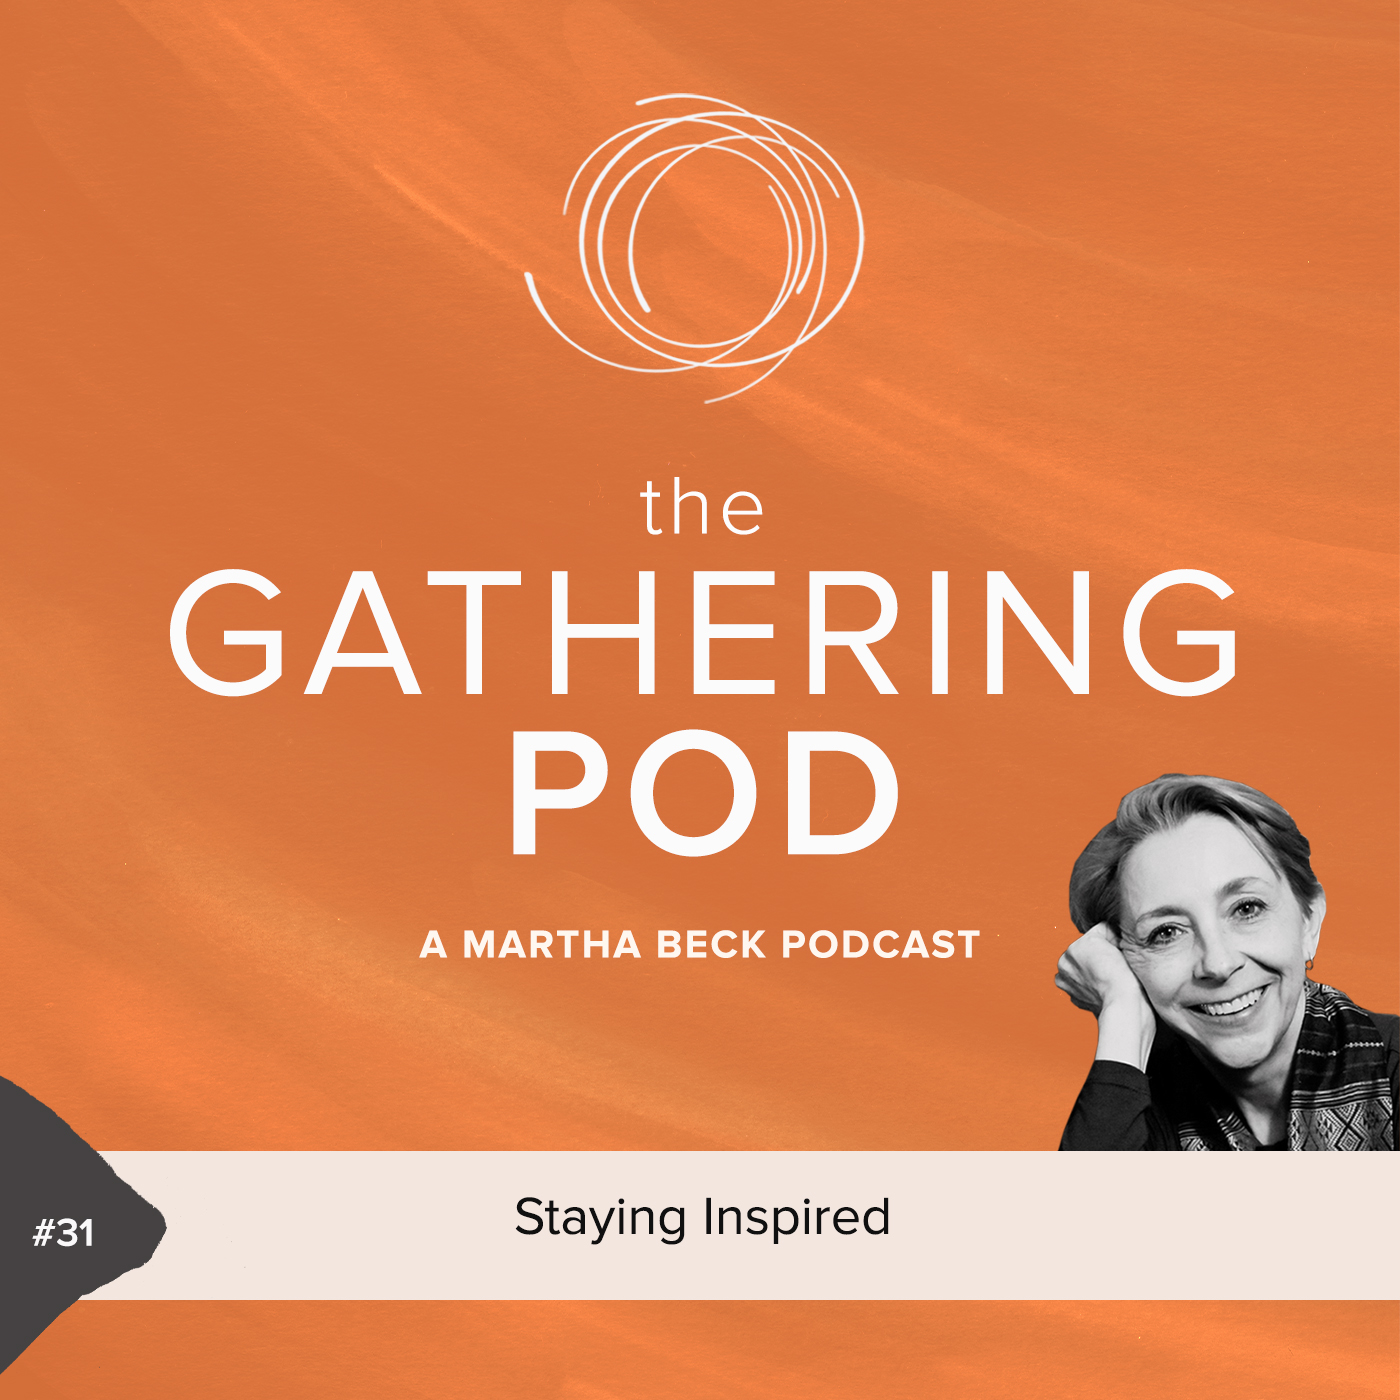 Image for The Gathering Pod A Martha Beck Podcast Episode #31 Staying Inspired